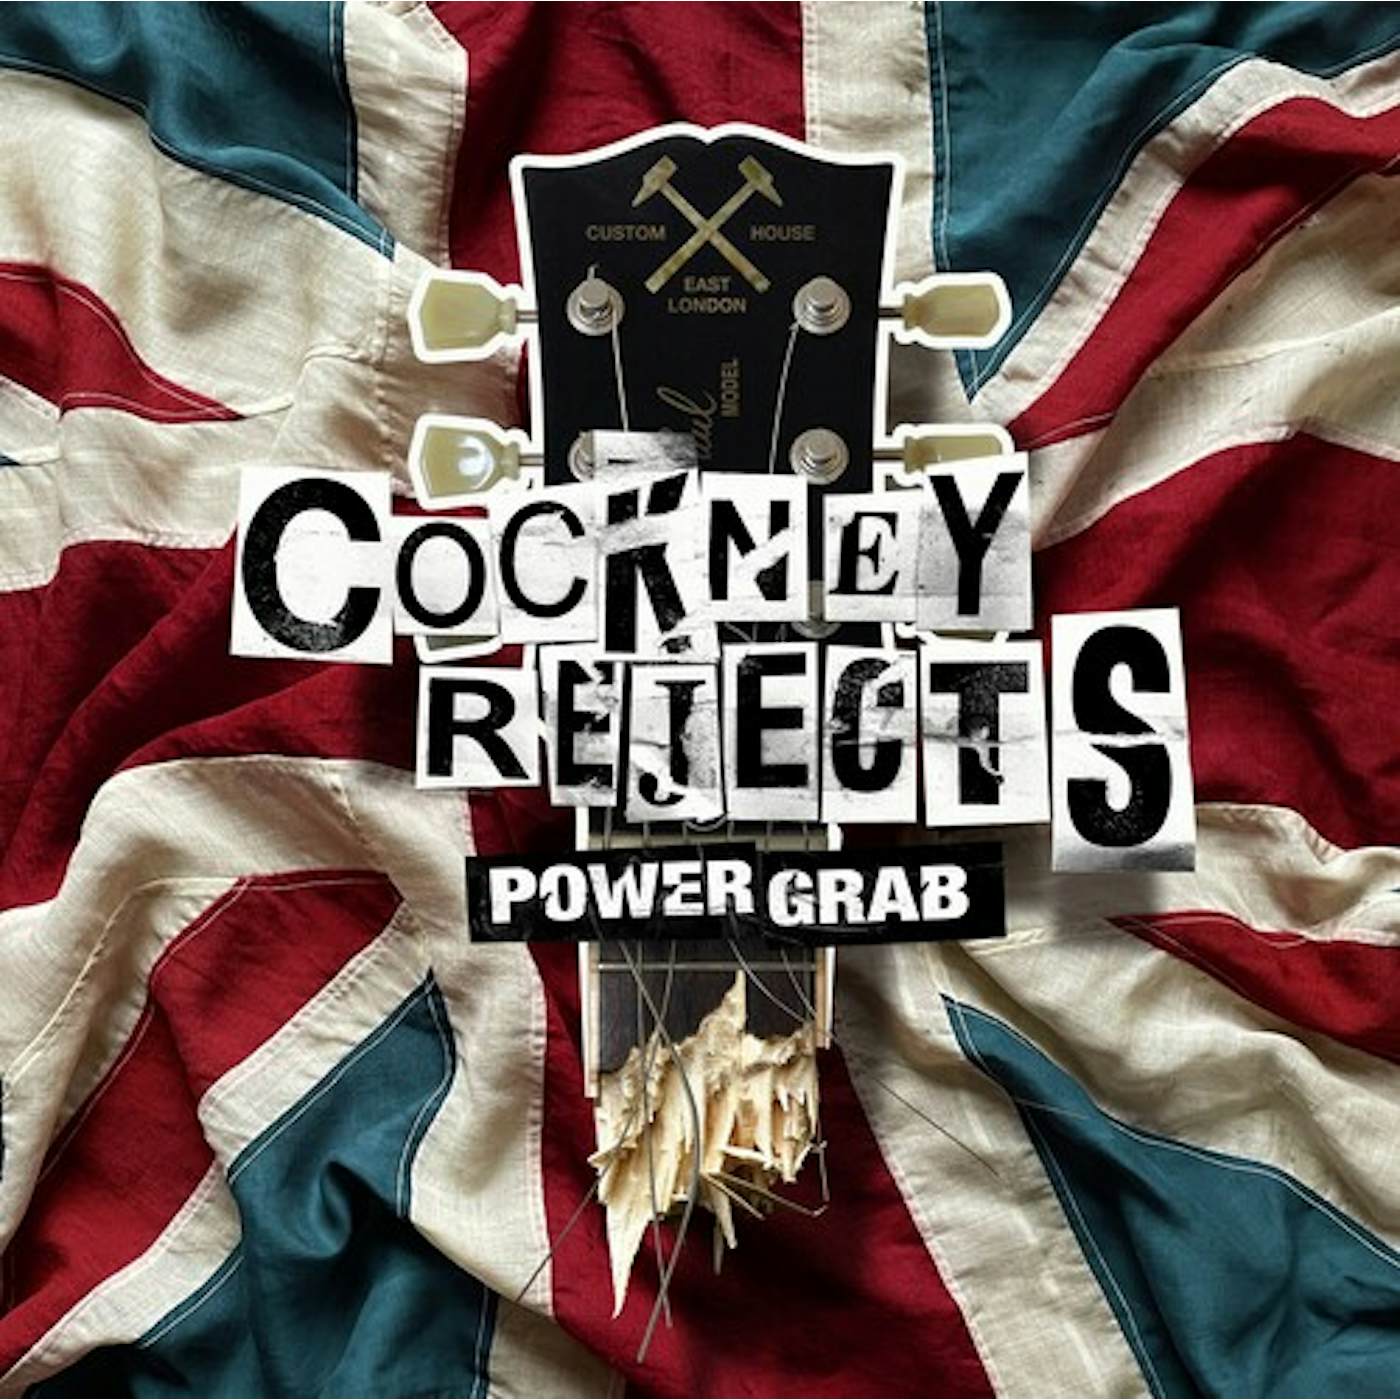 Cockney Rejects Power Grab Vinyl Record